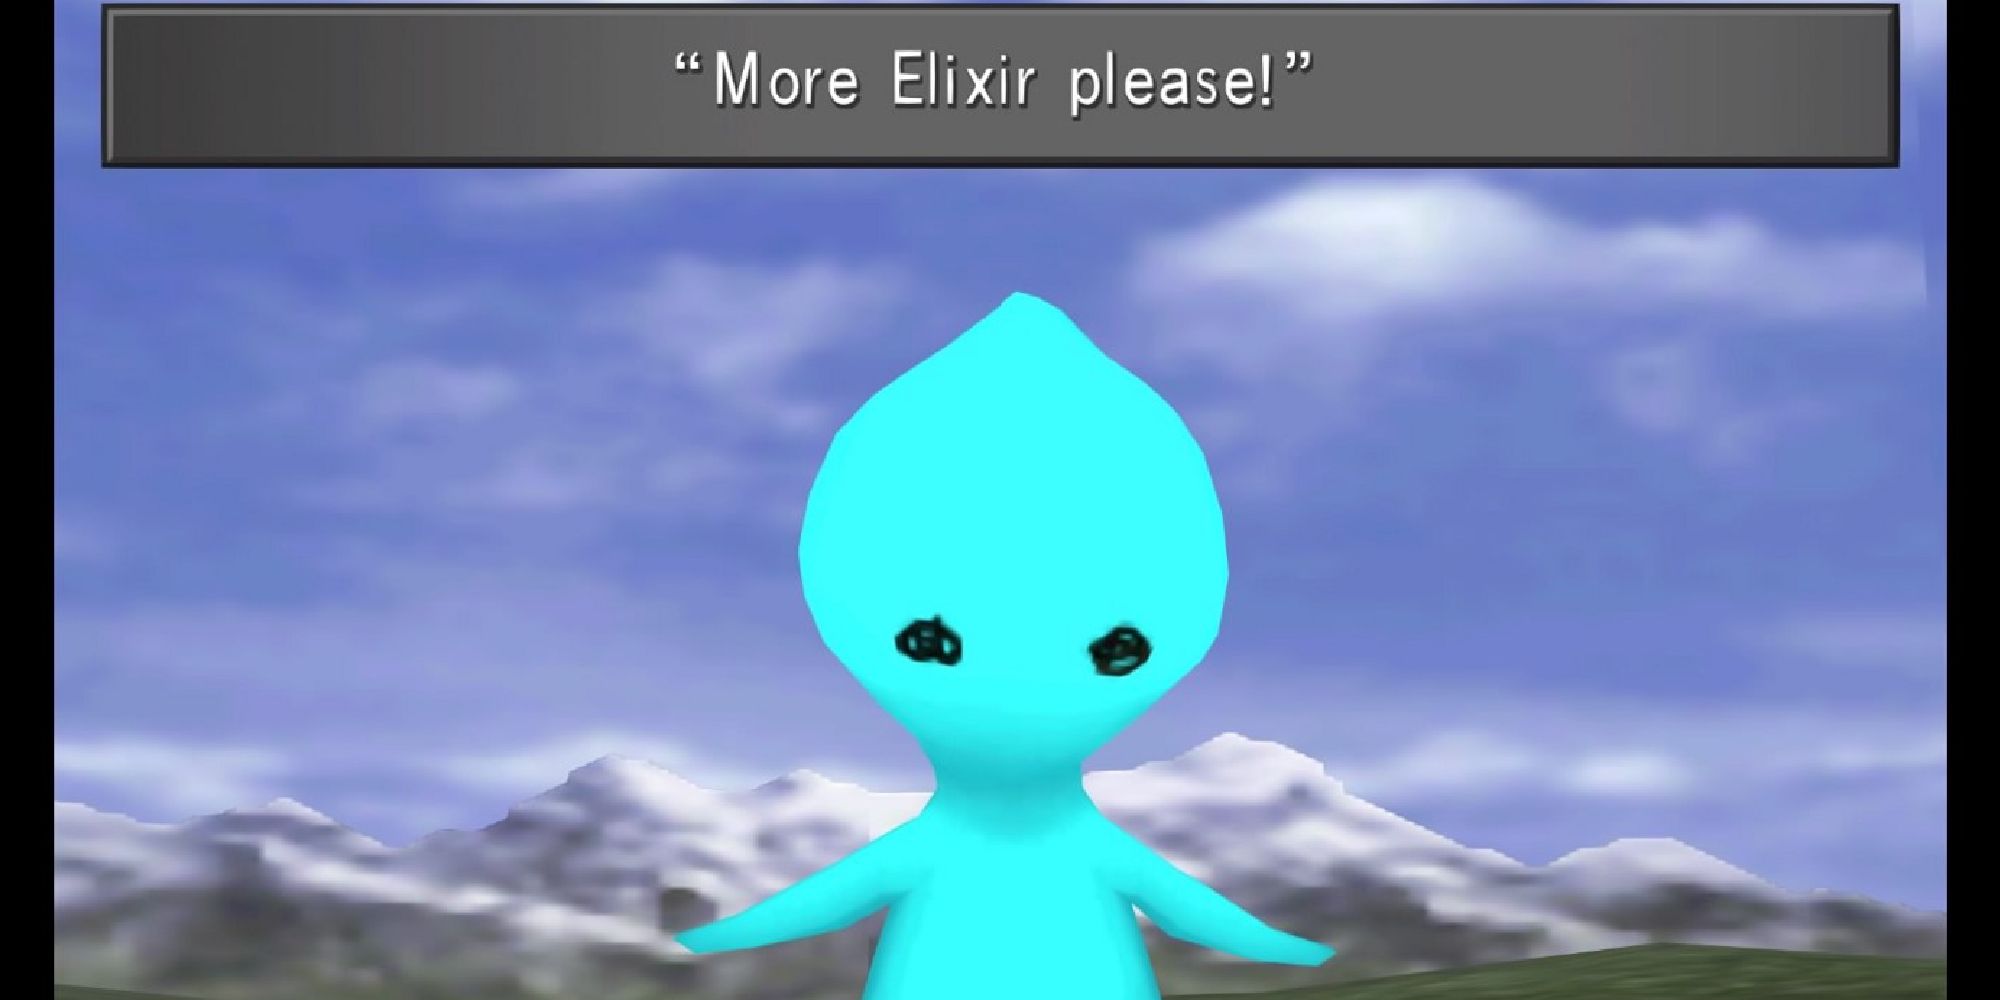 A screenshot from FInal Fantasy VIII's PuPu quest, showing the alien asking for more Elixirs